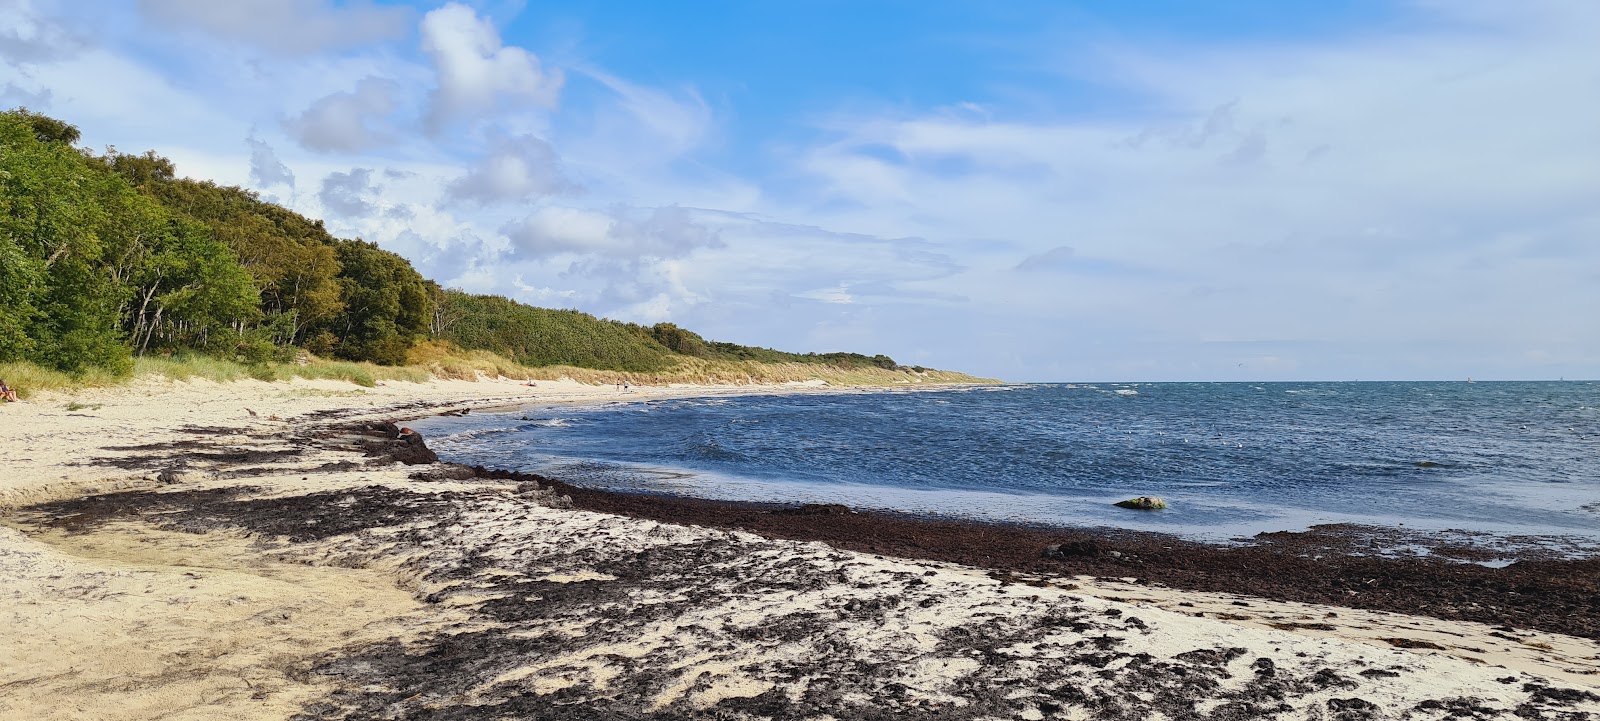 Photo of Strand Molle Odde with long straight shore